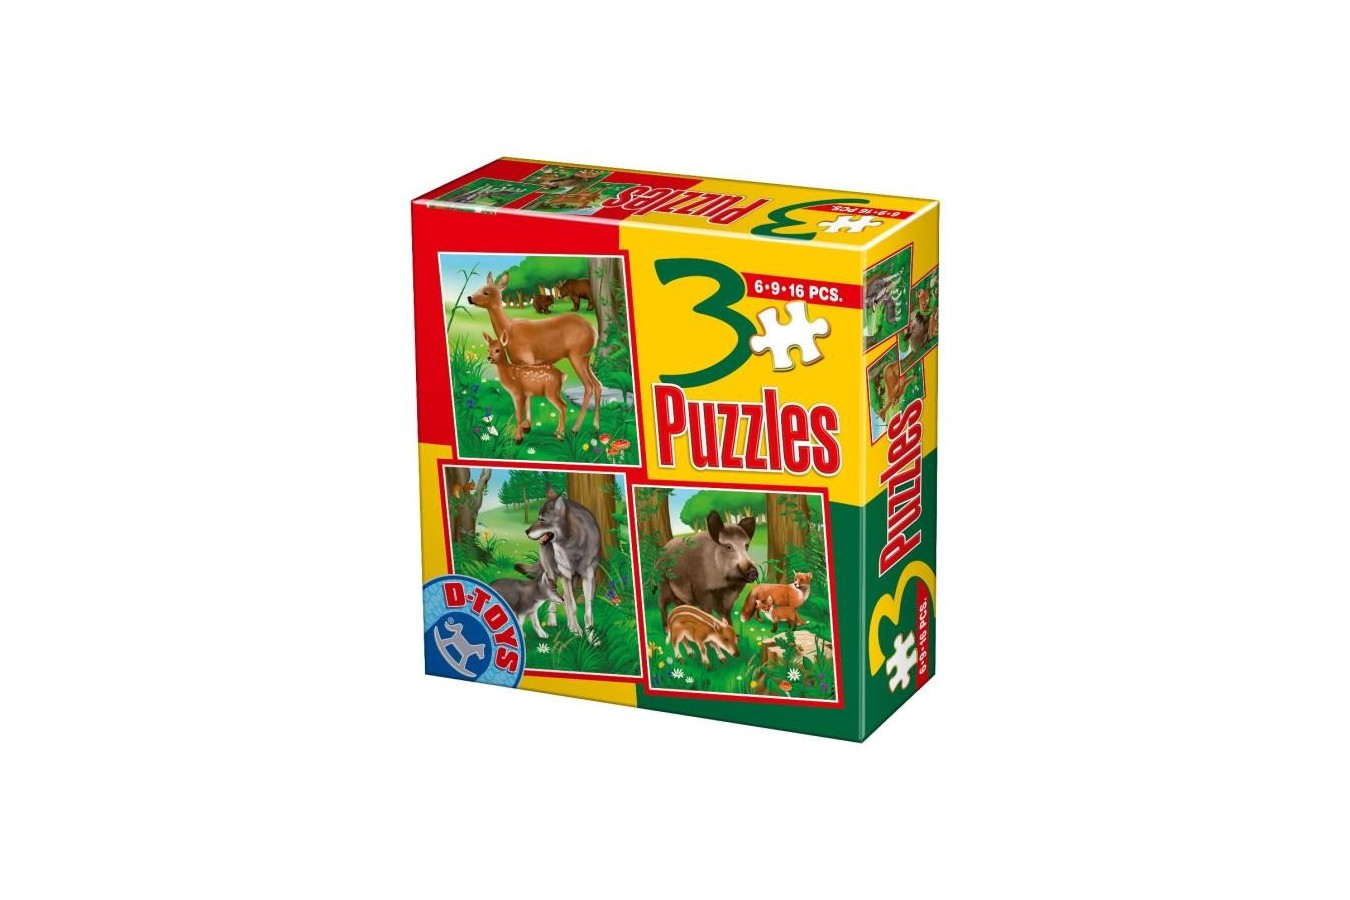 Puzzle D-Toys - Animale Salbatice, 6/9/12 piese (60150-3)